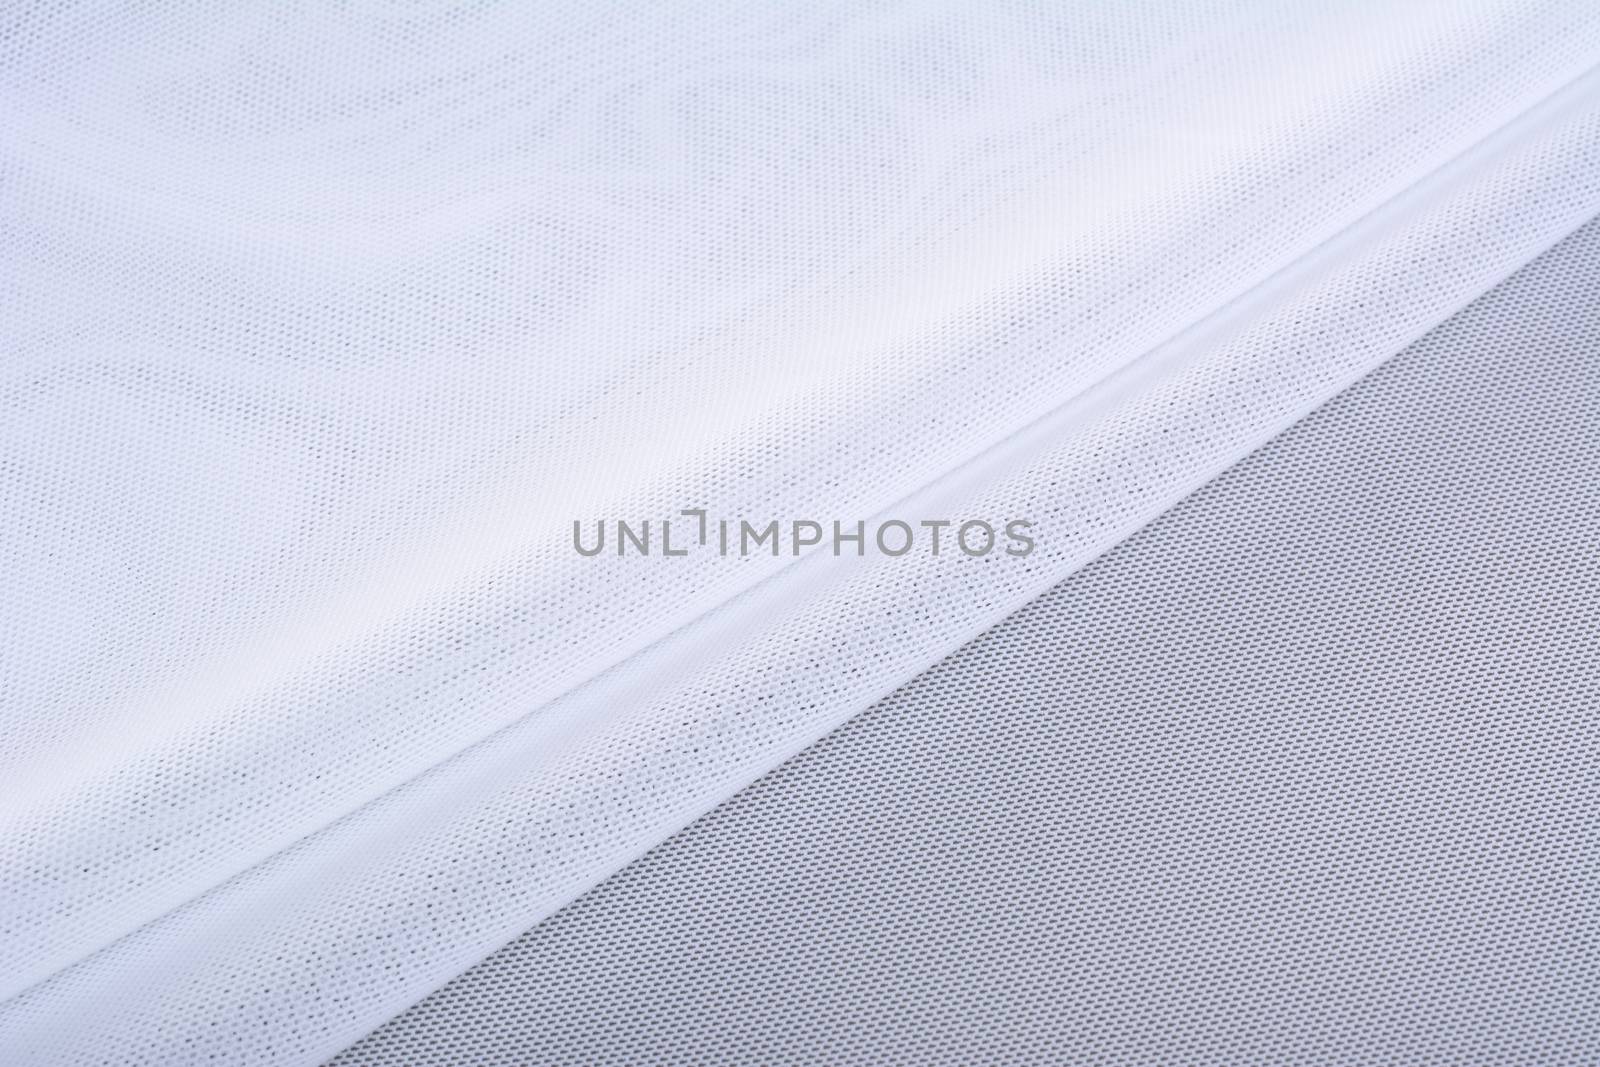 white Knitted elastic fabric, weaving of threads texture, crumpled fold. For underwear, sports clothes and swimwear. Space for text.